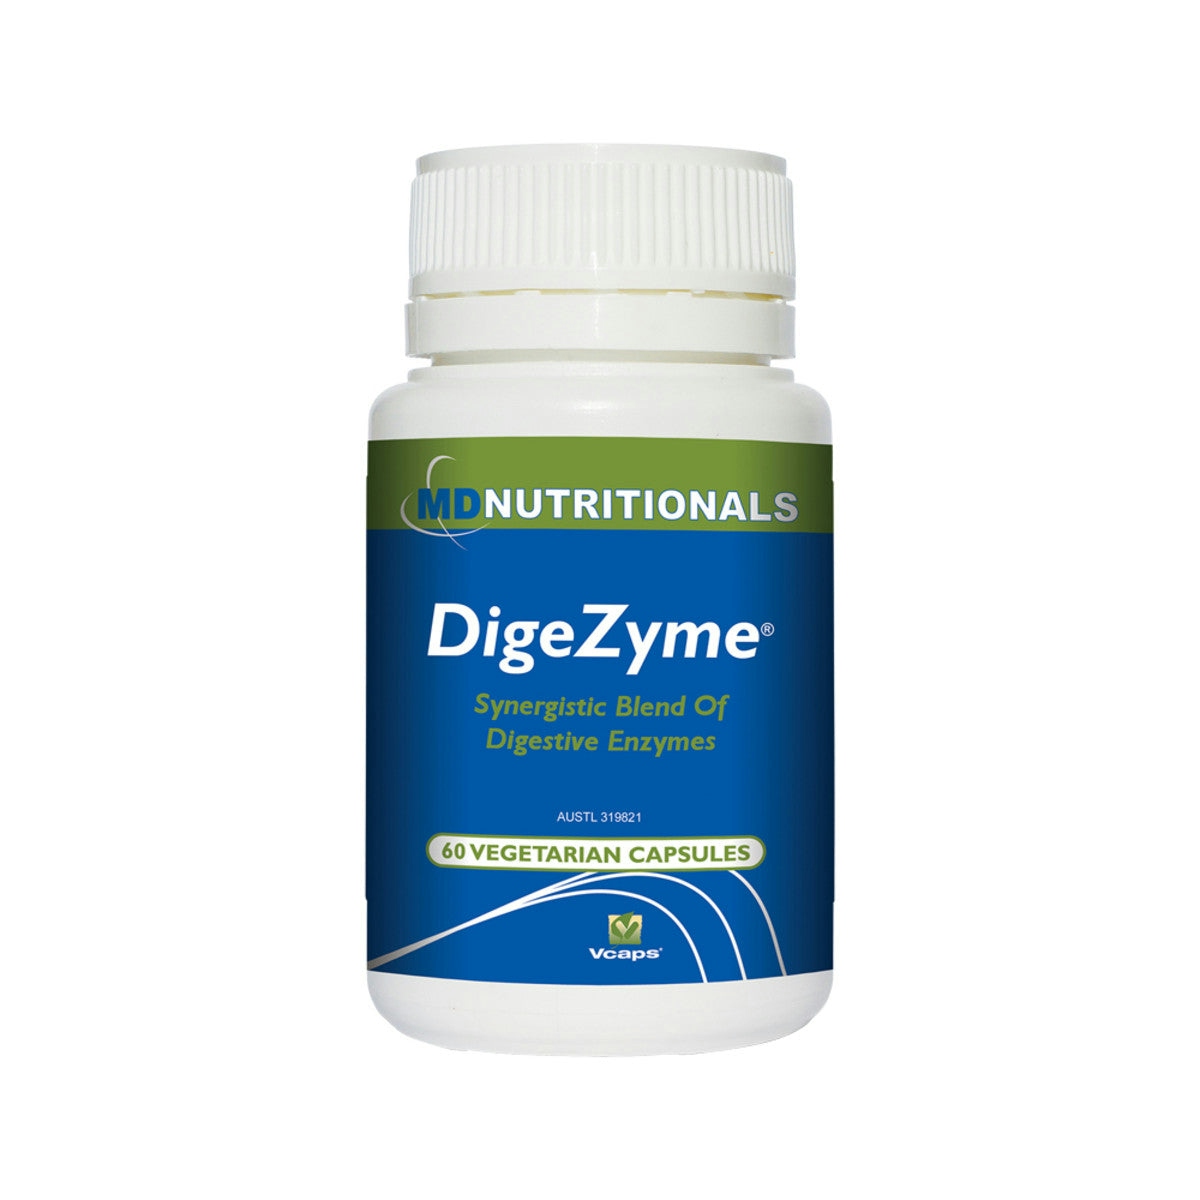 image of Md Nutritionals DigeZyme 60vc on white background 